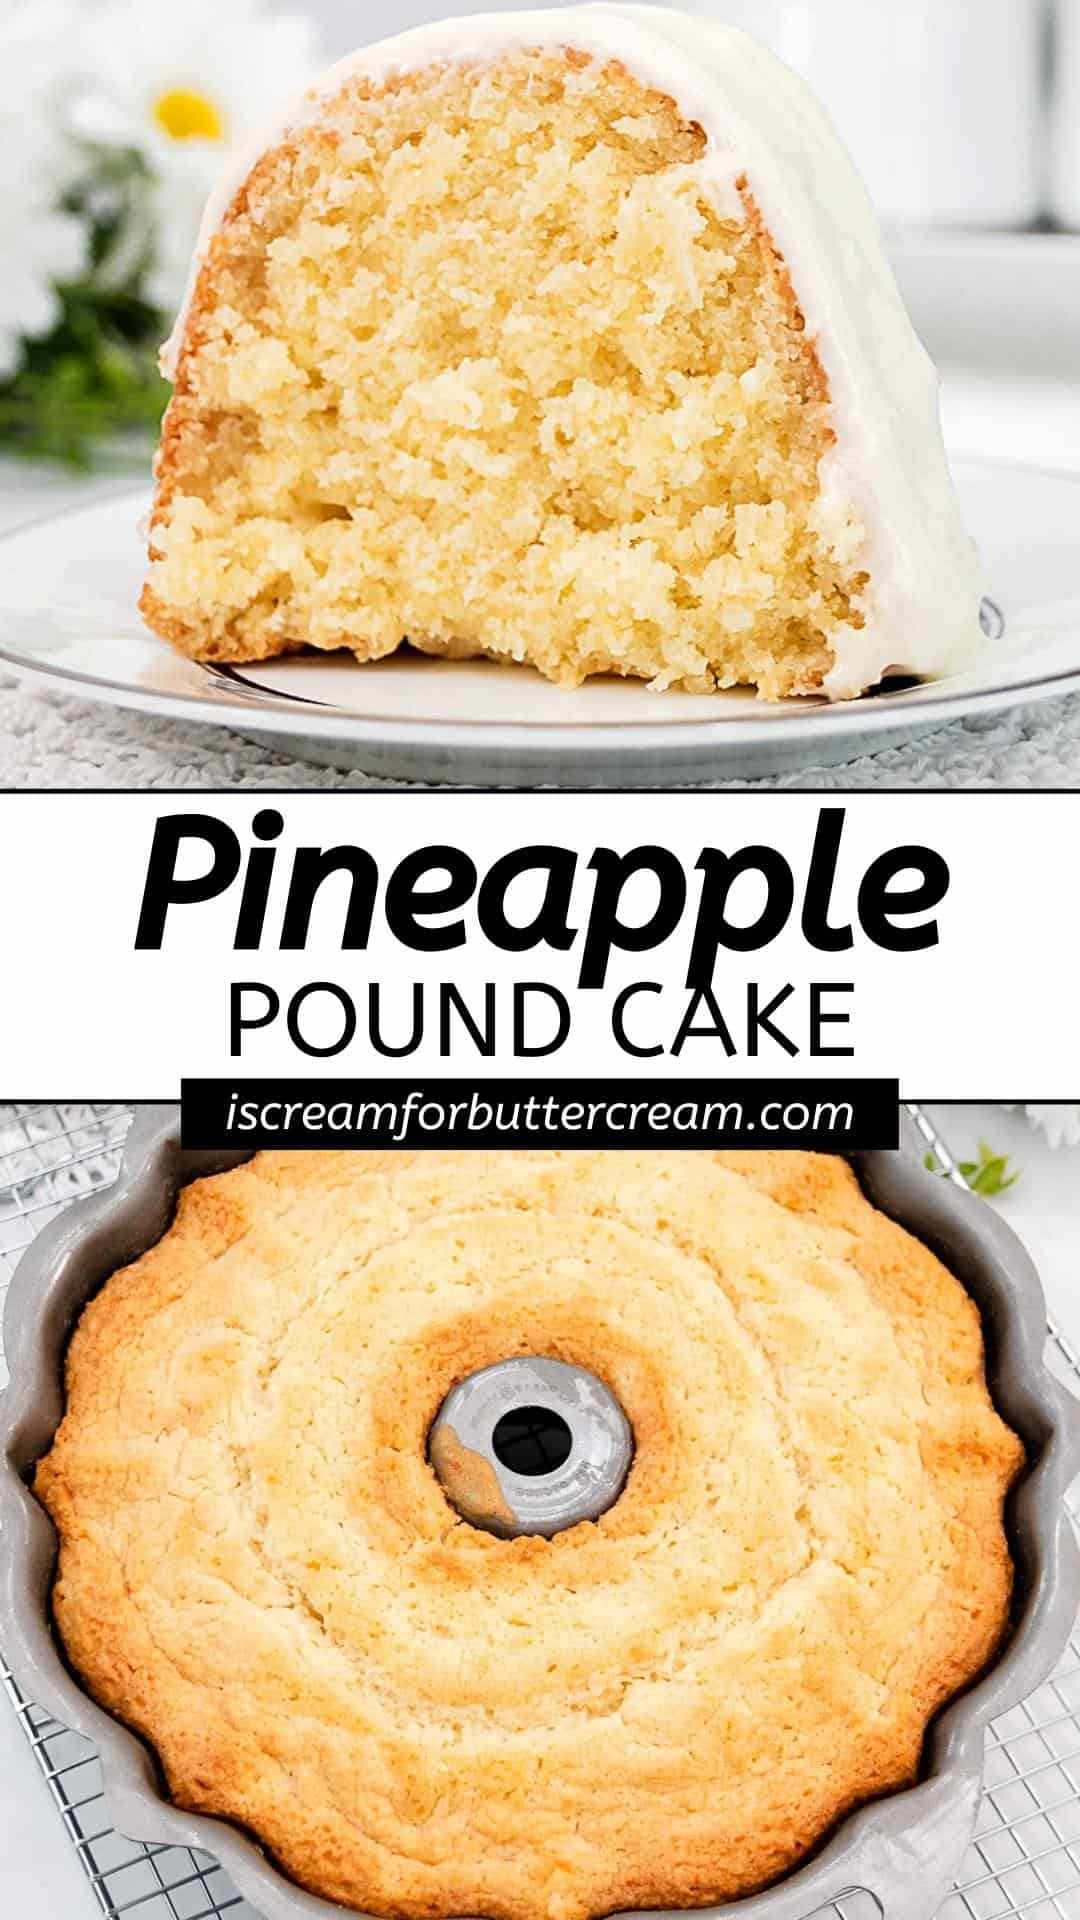 Collage of bundt cake with pineapple and text overlay.